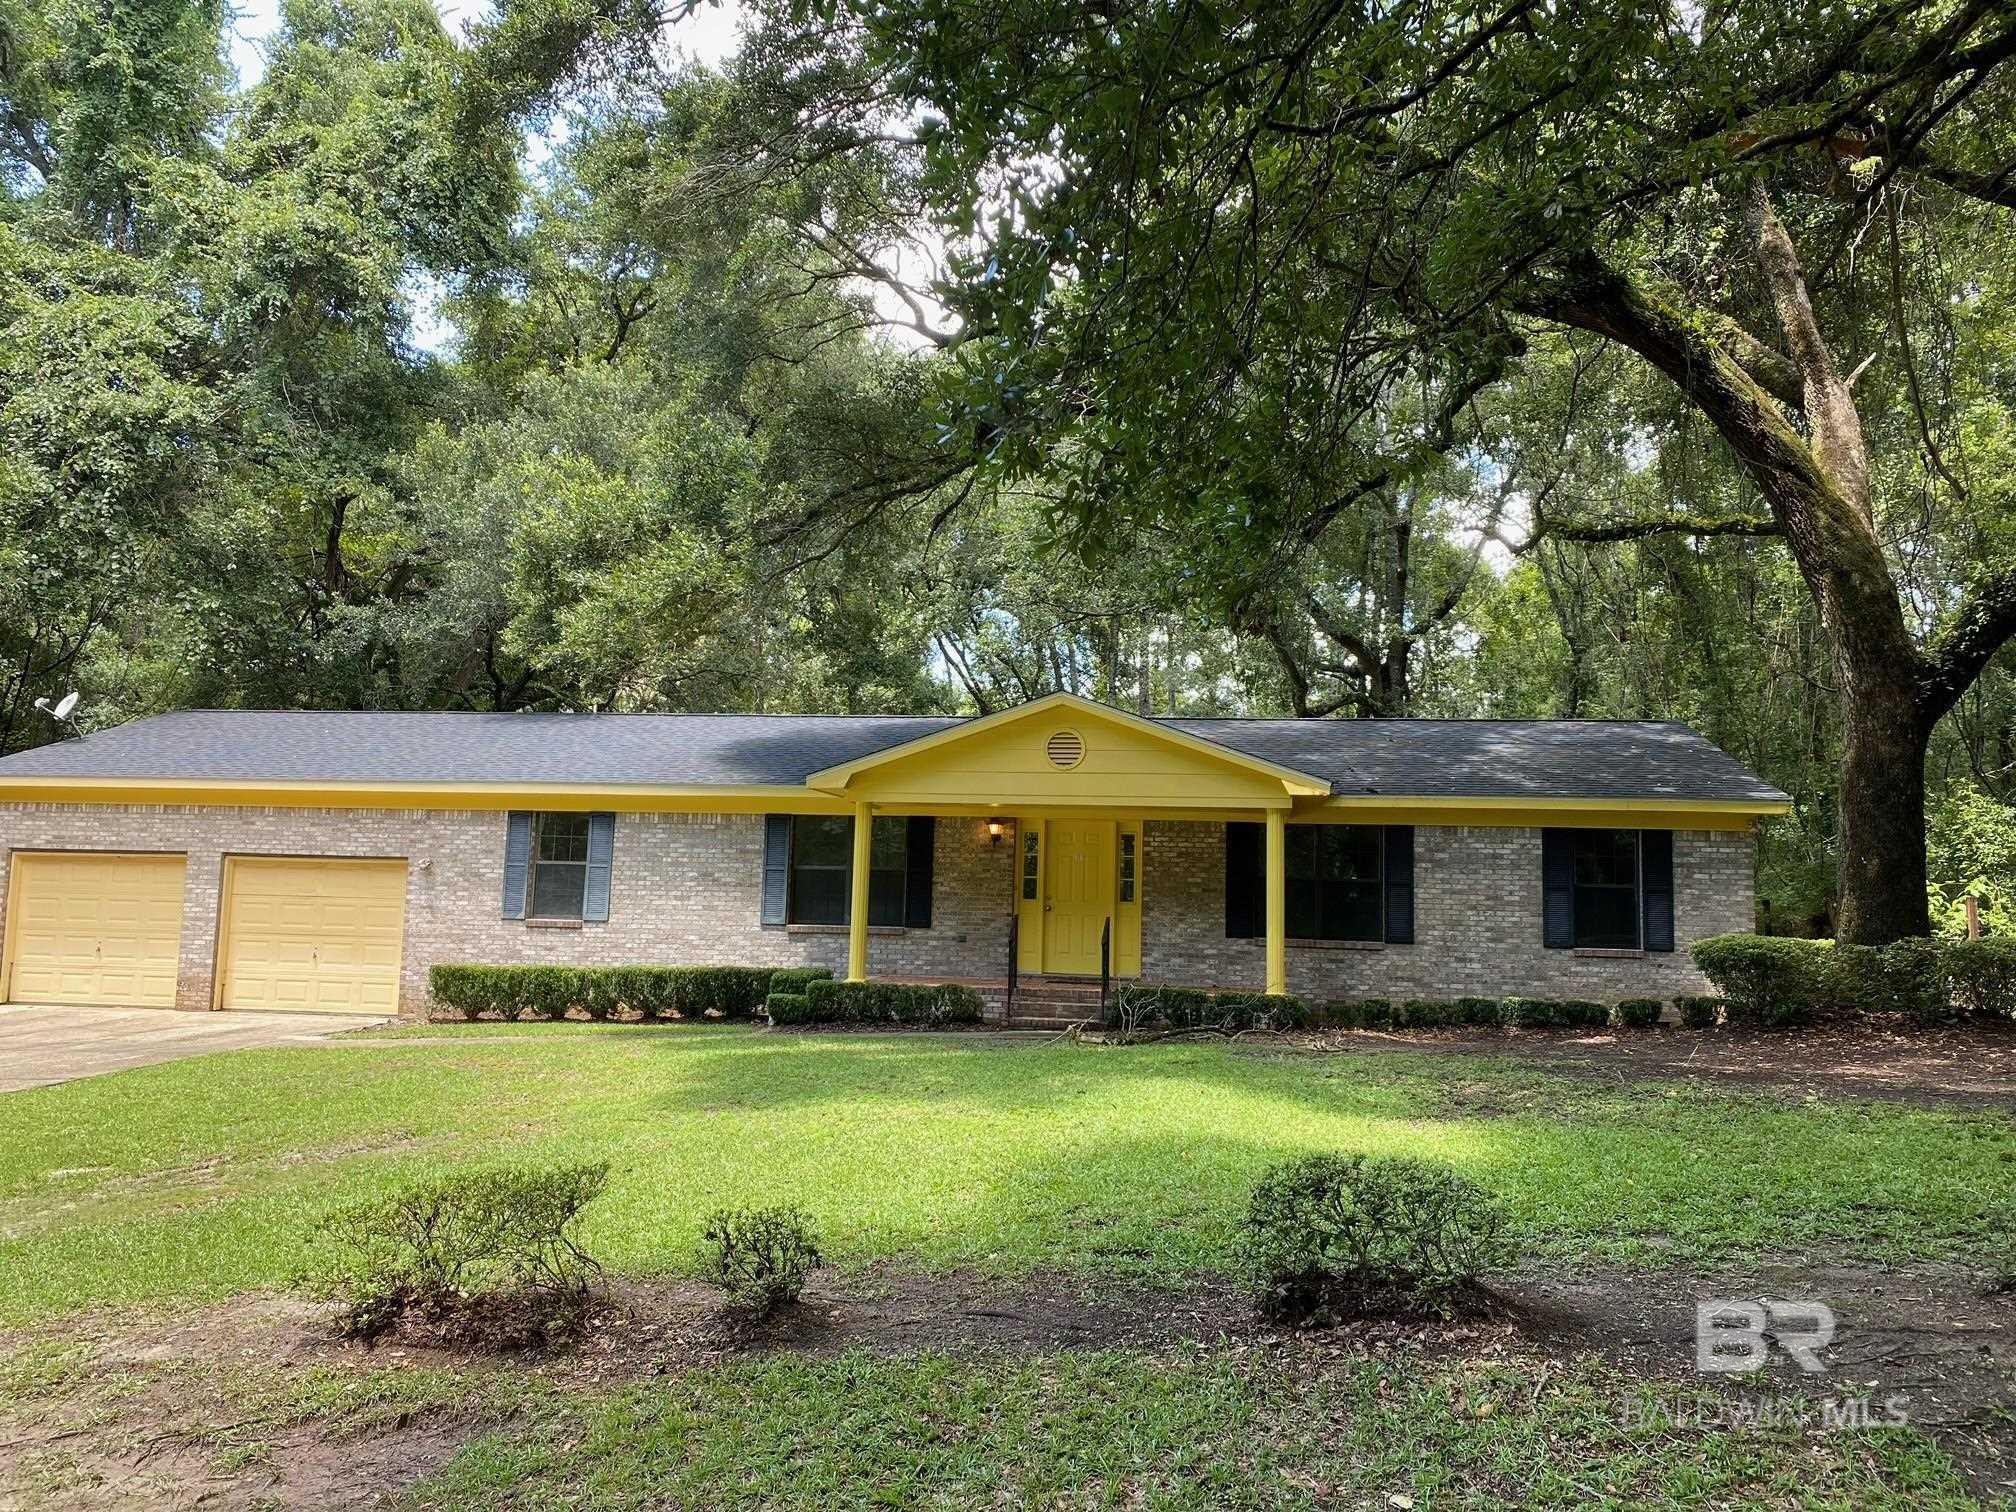 Good Bones, Fixer Upper!! Huge lot!!! Great location!!! Bronze Fortified roof installed 2018. This is the opportunity for you to put your personal touches on a home. This home is surrounded by sprawling gorgeous mature Live Oaks, it's a 2 block walk to the bay to see sunsets, and sits on a large 300 x 100 lot, potentially large enough to build an additional home. The house needs flooring, appliances, and updates to the bathrooms and kitchen. Woods Ave. is a small street tucked away behind the football and baseball fields of Fairhope. It only has 4 houses on it, and the home is across the street from walking trails that lead to the dog park.